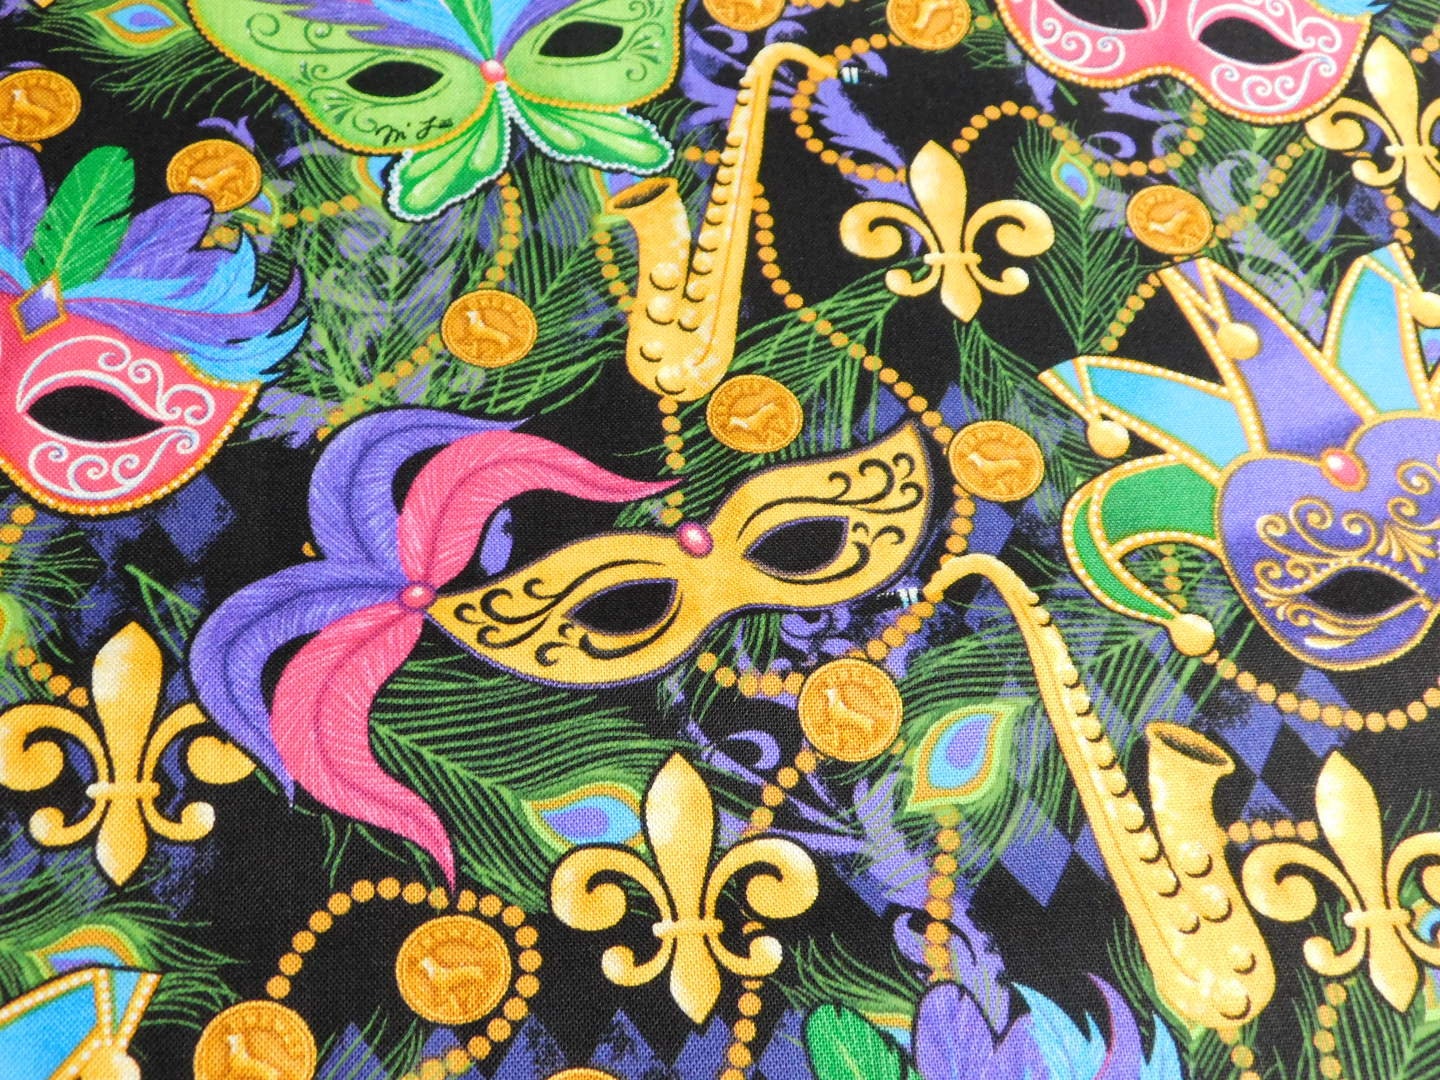 Mardi Gras by M Liss Beautiful and Colorful Mardi Gras Fabric